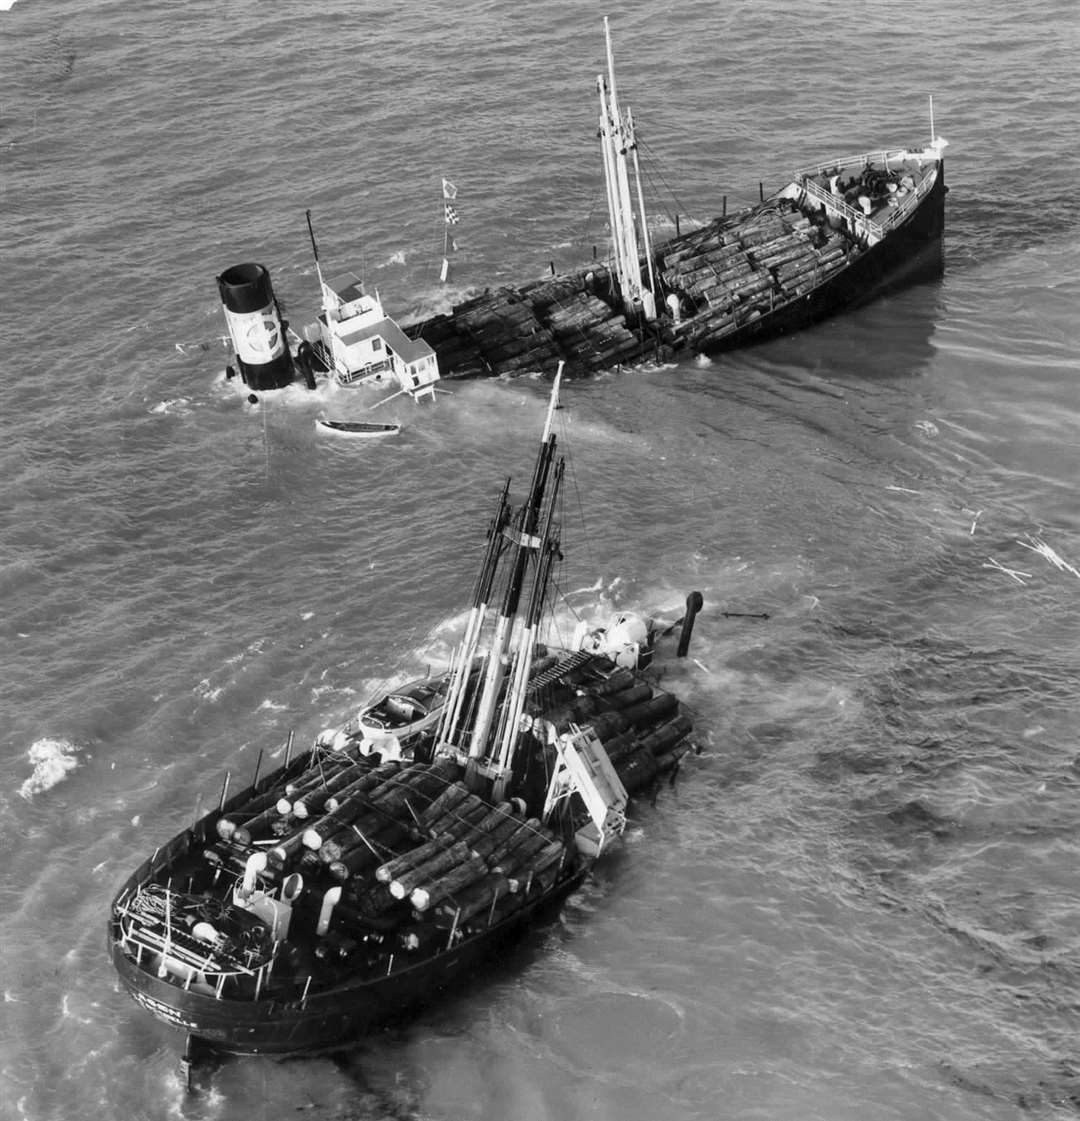 French Cargo vessel Agen wrecked on the Goodwin Sands in January 1952